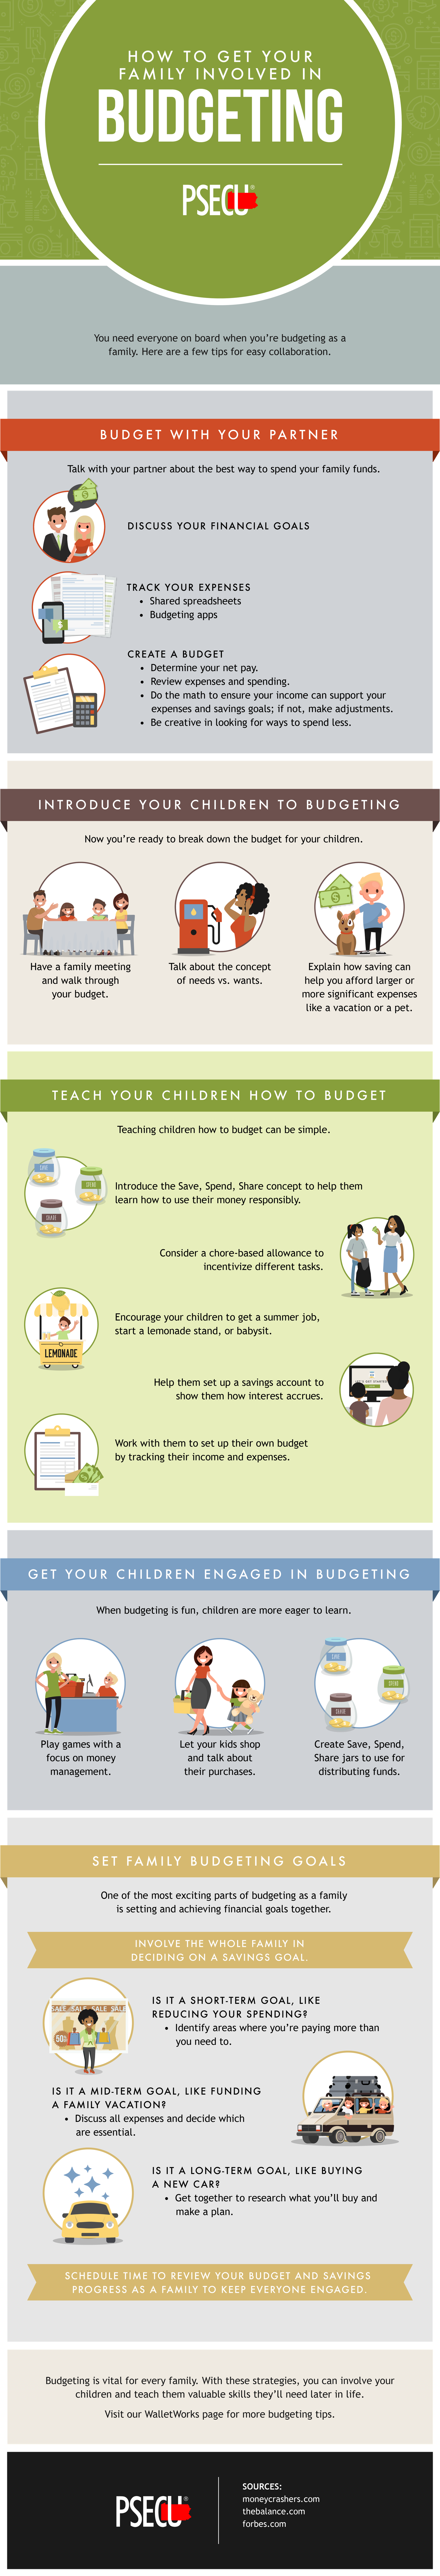 Why is It Important to Budget for Your Family?